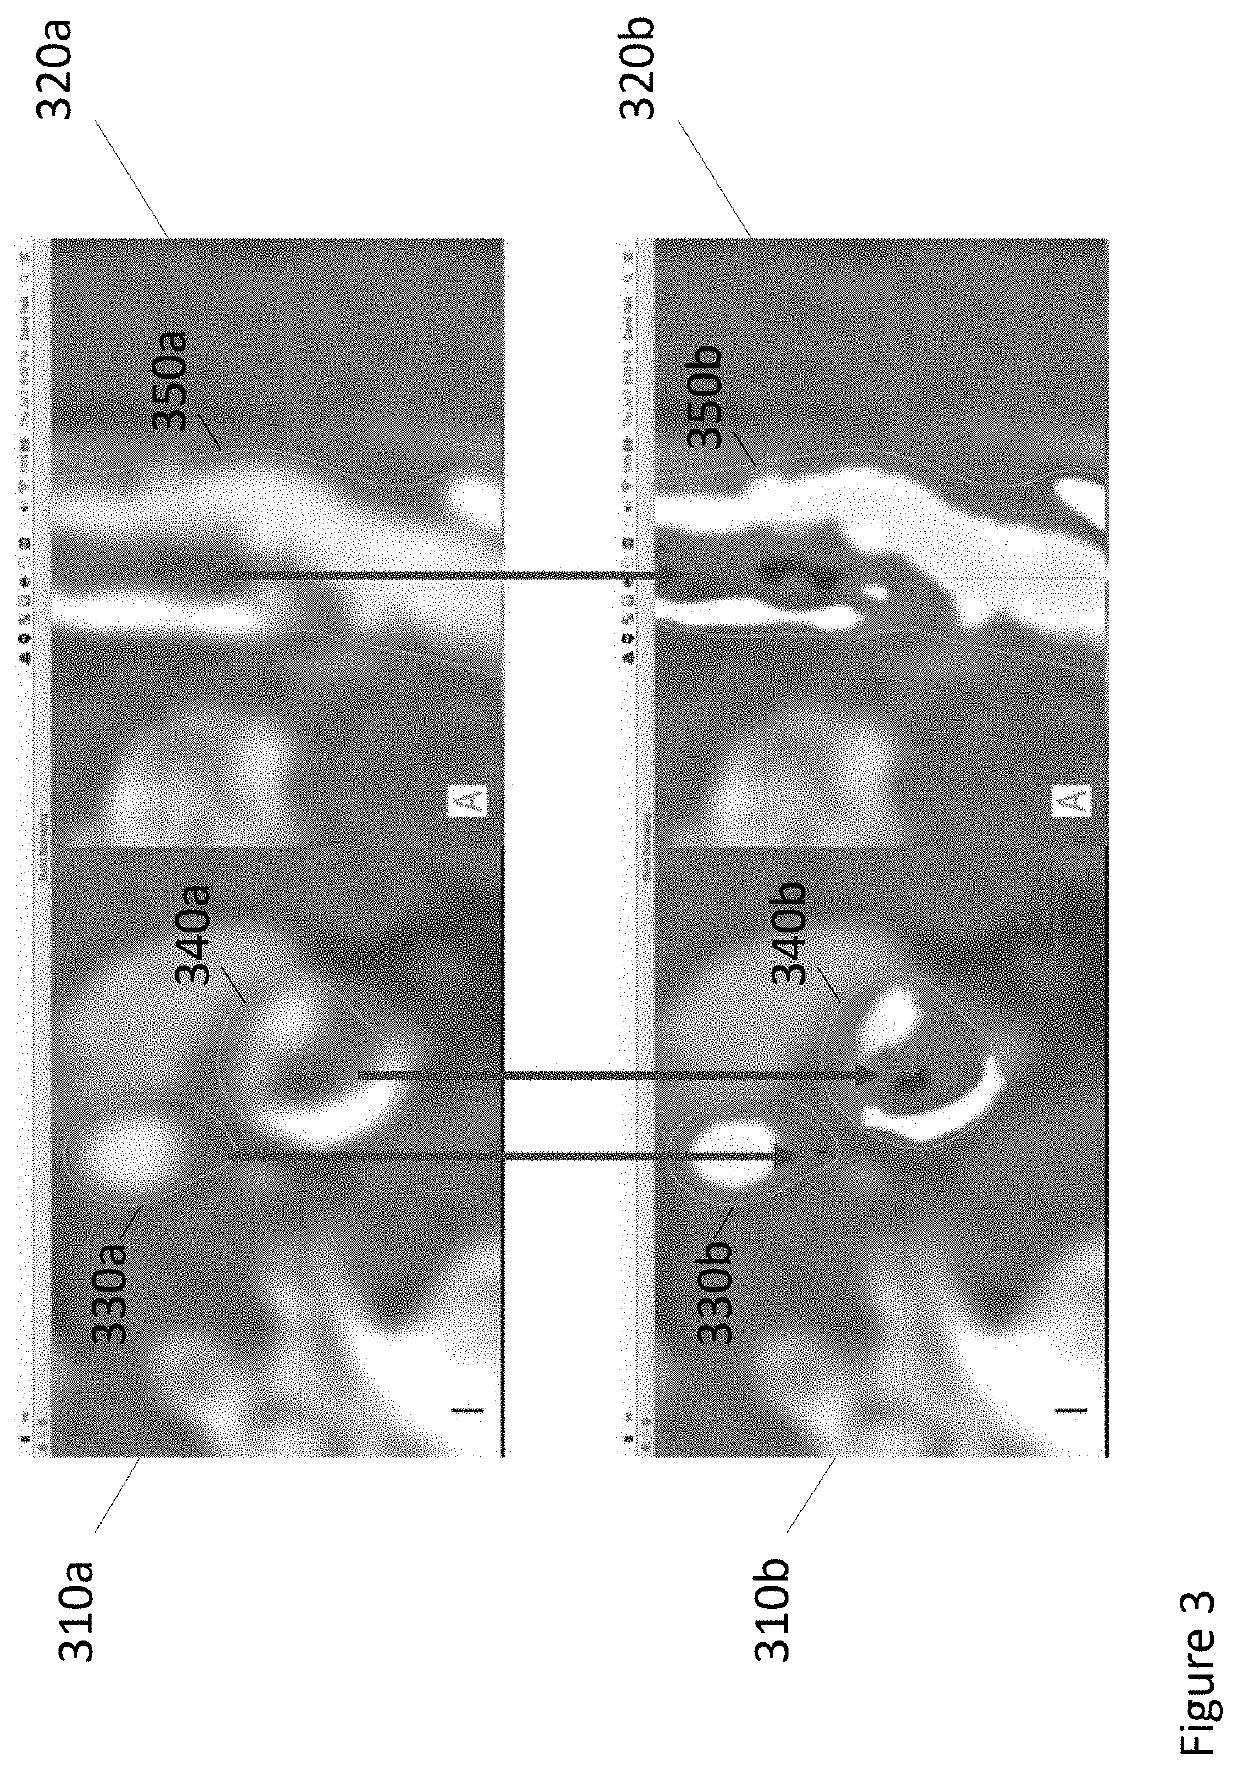 Systems and methods for improving soft tissue contrast, multiscale modeling and spectral ct